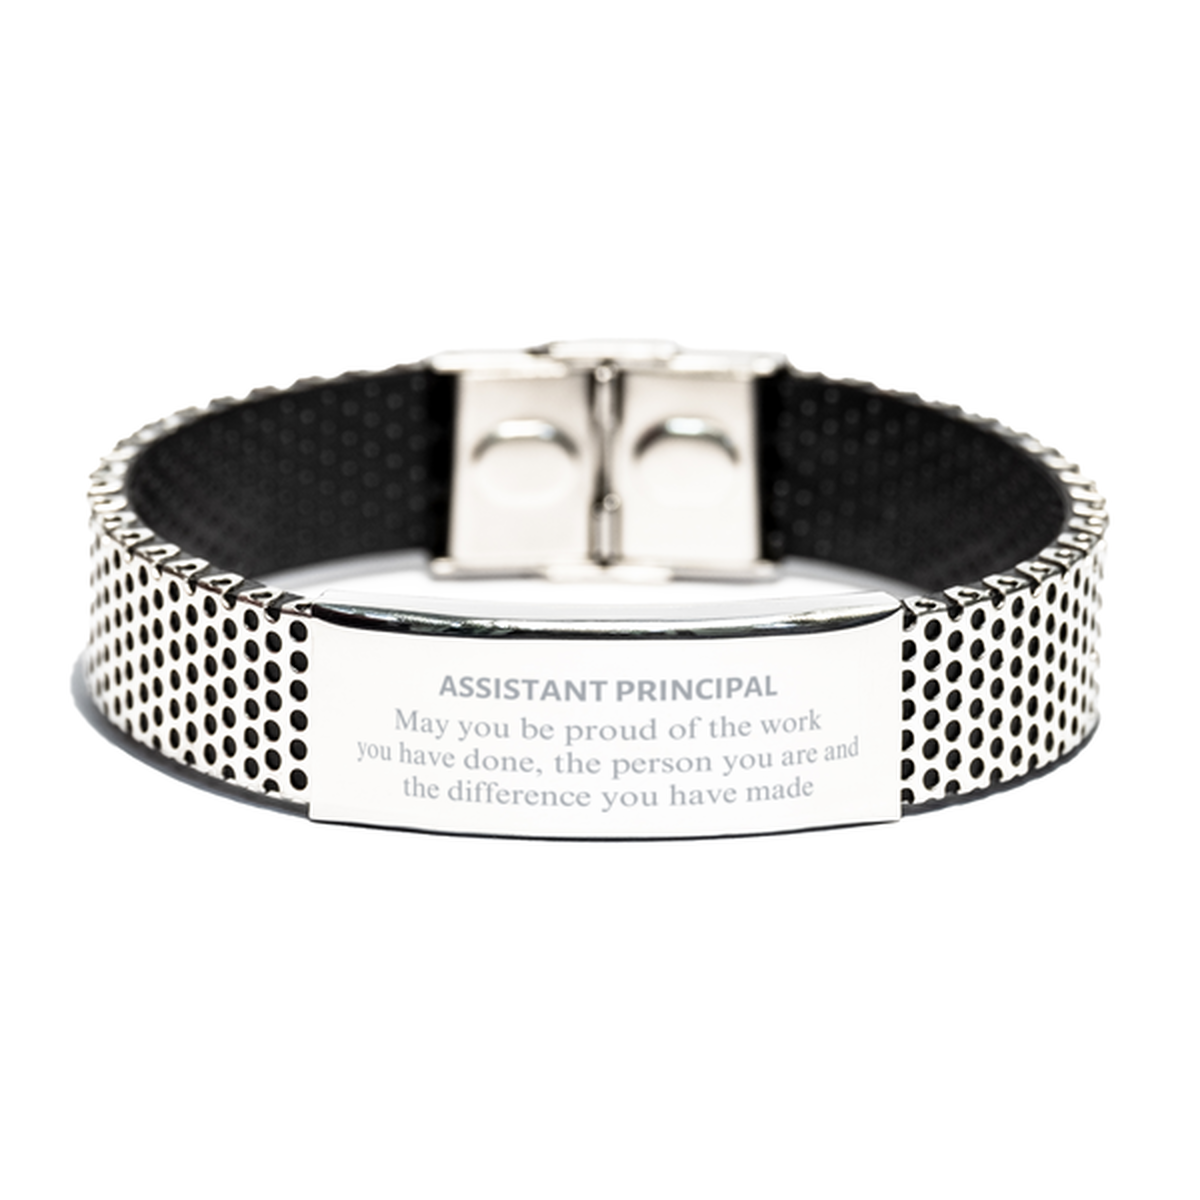 Assistant Principal May you be proud of the work you have done, Retirement Assistant Principal Stainless Steel Bracelet for Colleague Appreciation Gifts Amazing for Assistant Principal